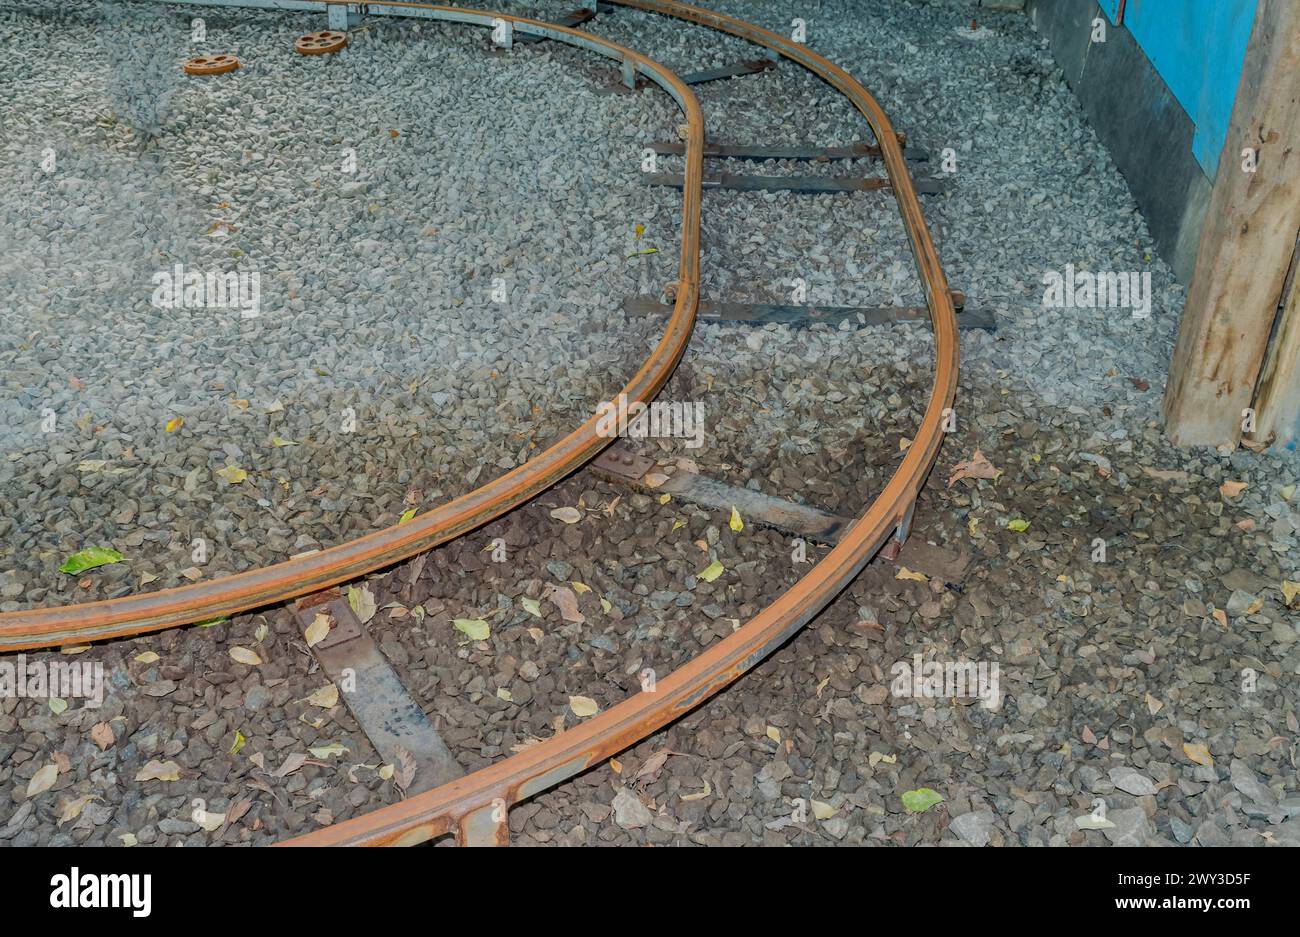 Curved section of track used for children's train ride in South Korea Stock Photo